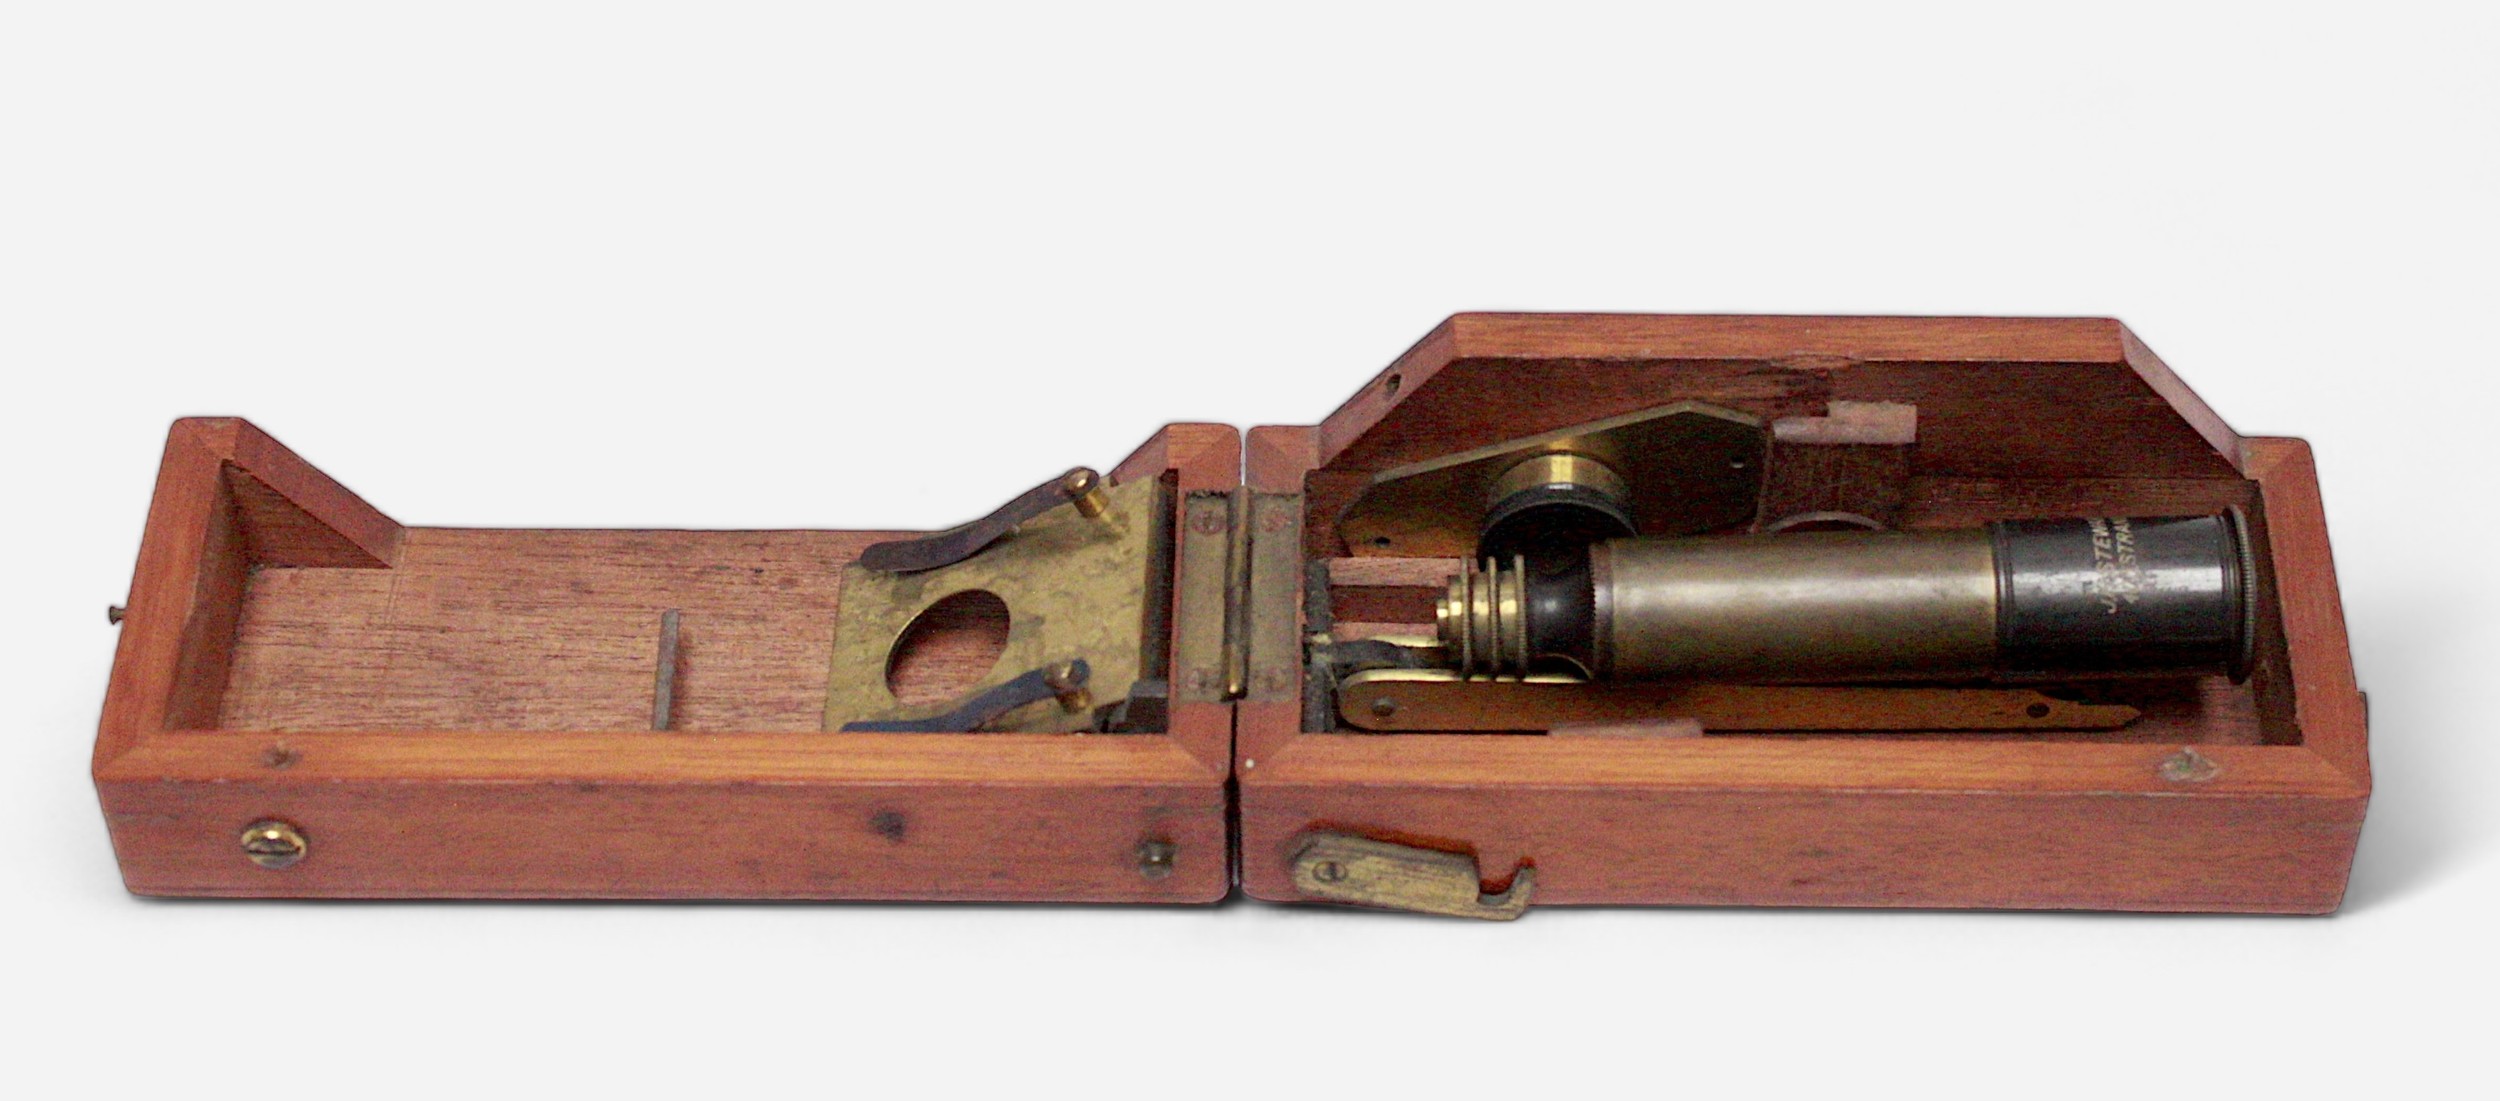 A small monocular travelling microscope by J. H. Steward, Strand, London, with spare lens, housed in - Image 2 of 4